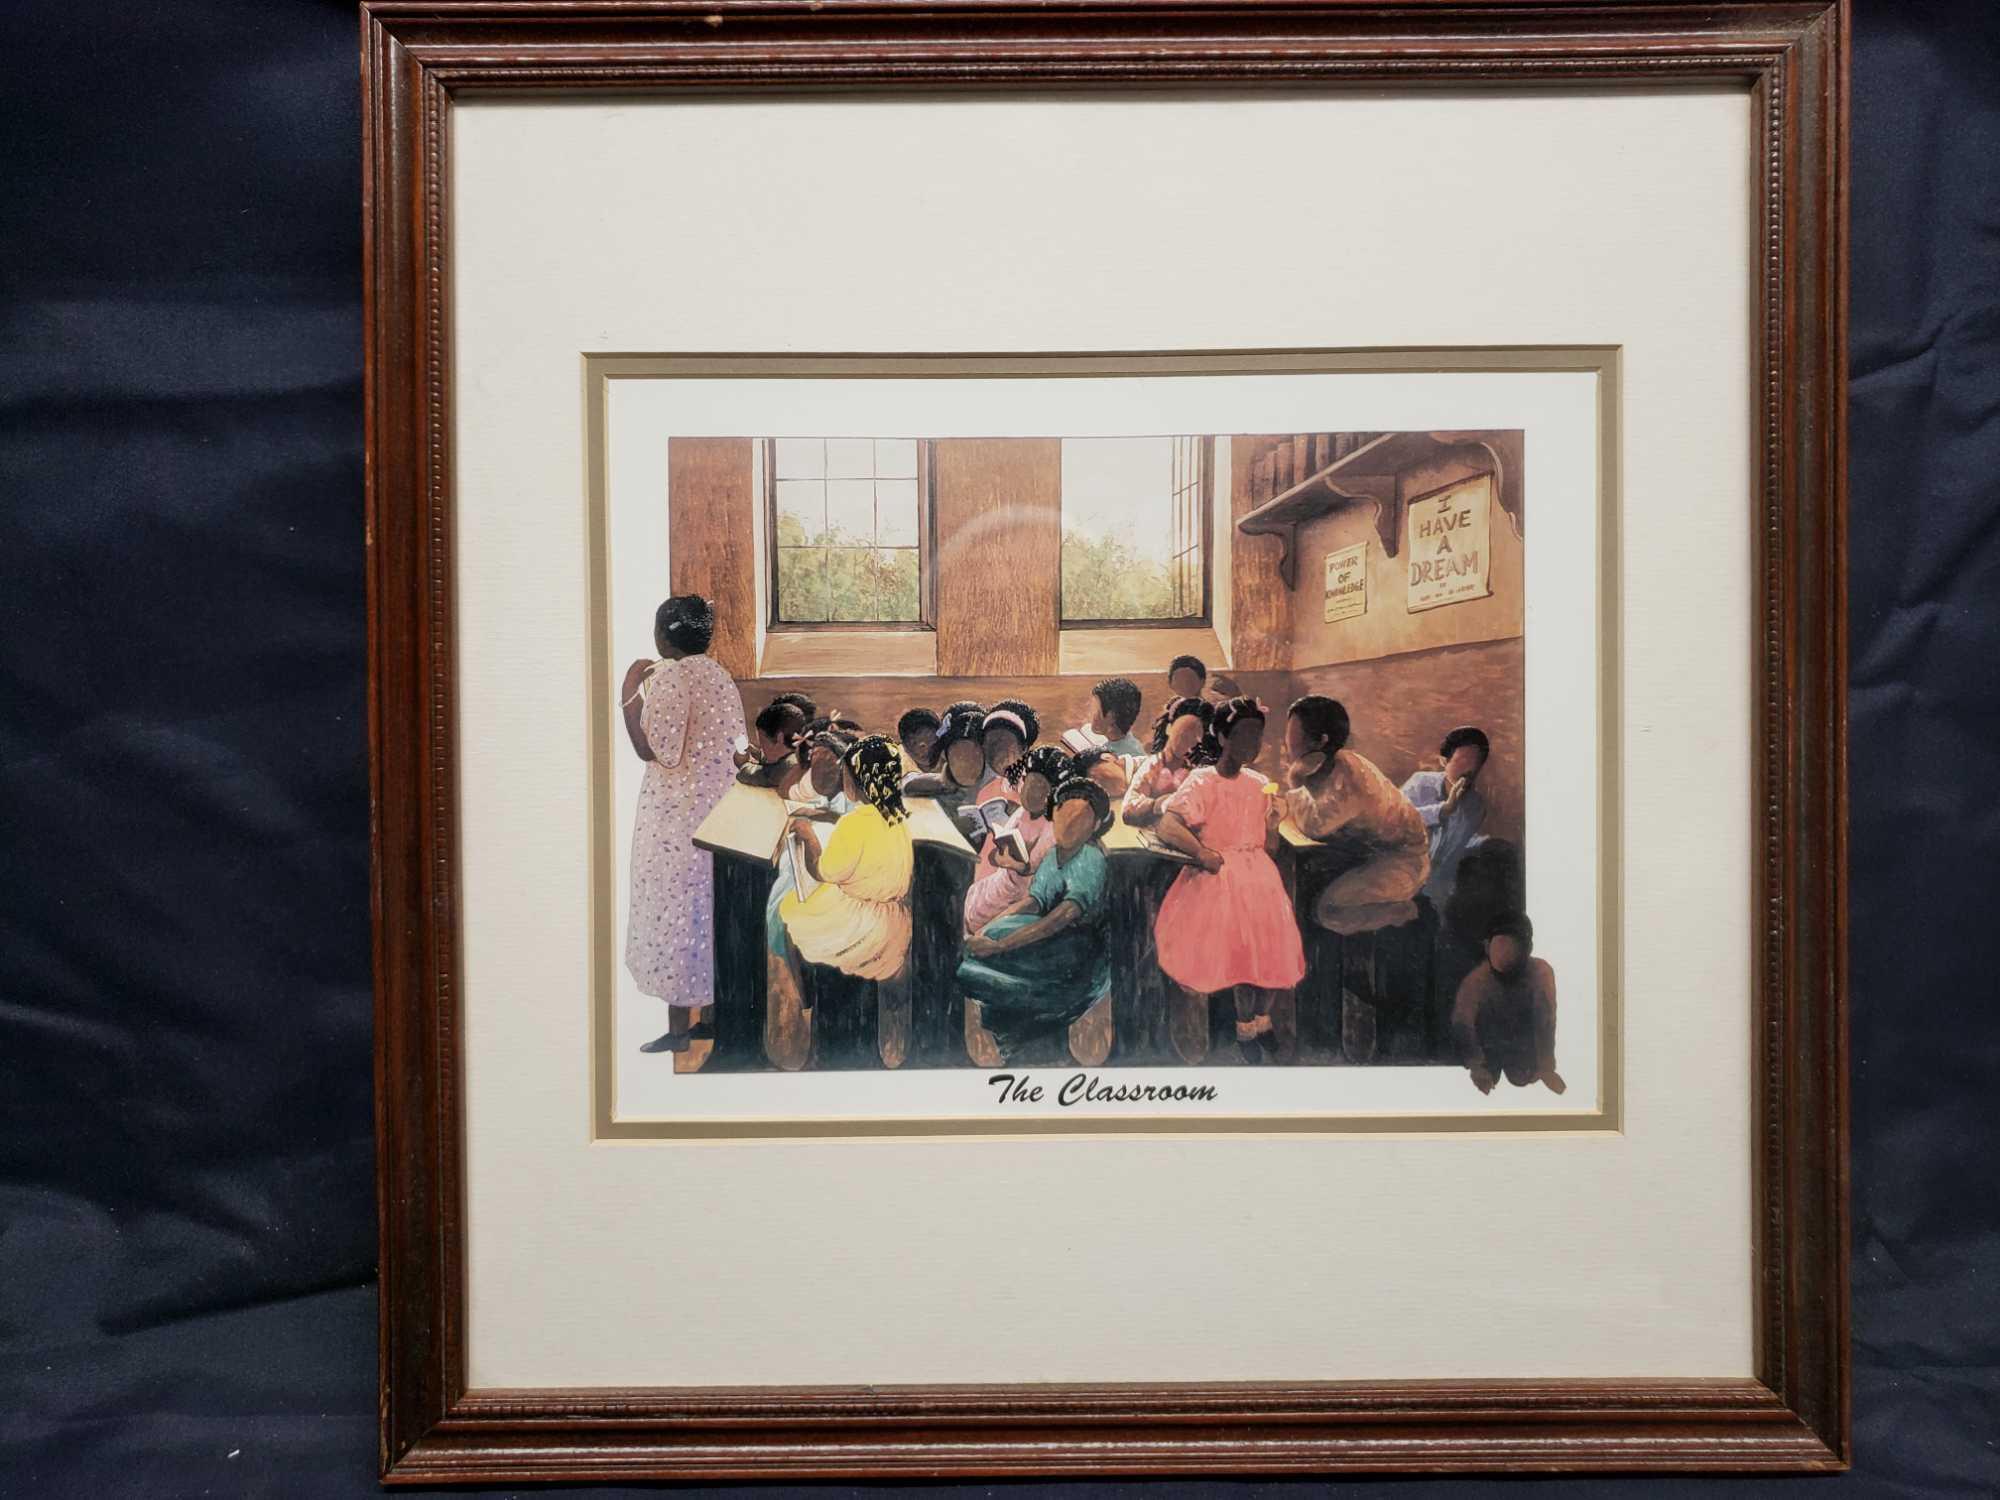 Kids at play framed pic. Small poster.The Classroom pic. And painting of boy.